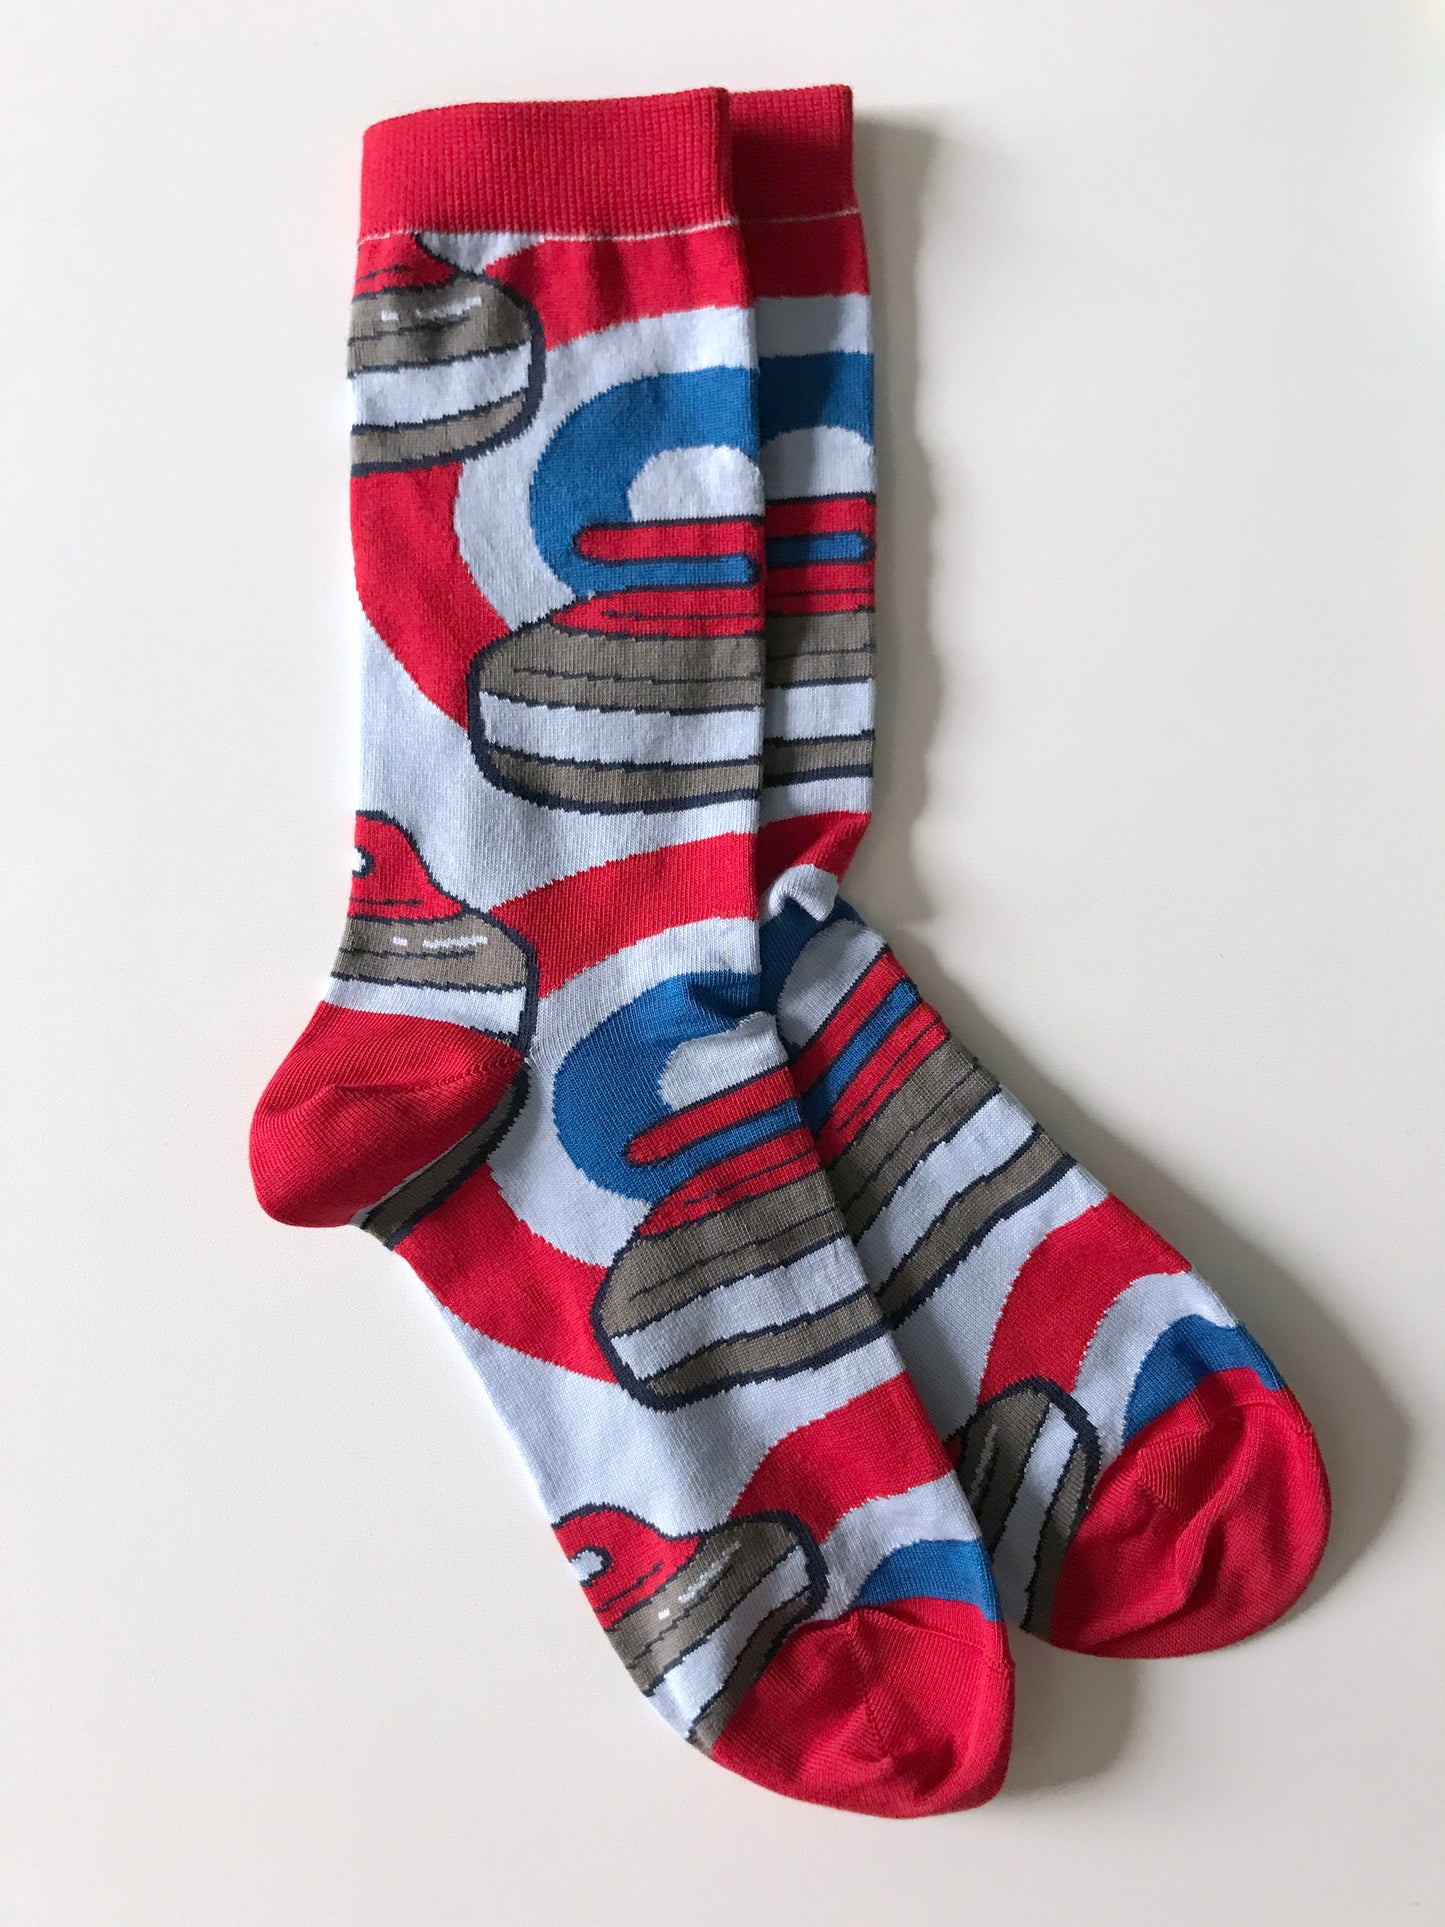 A pair of socks with red cuffs, heels and toes is patterned with curling rocks and red and blue rings.